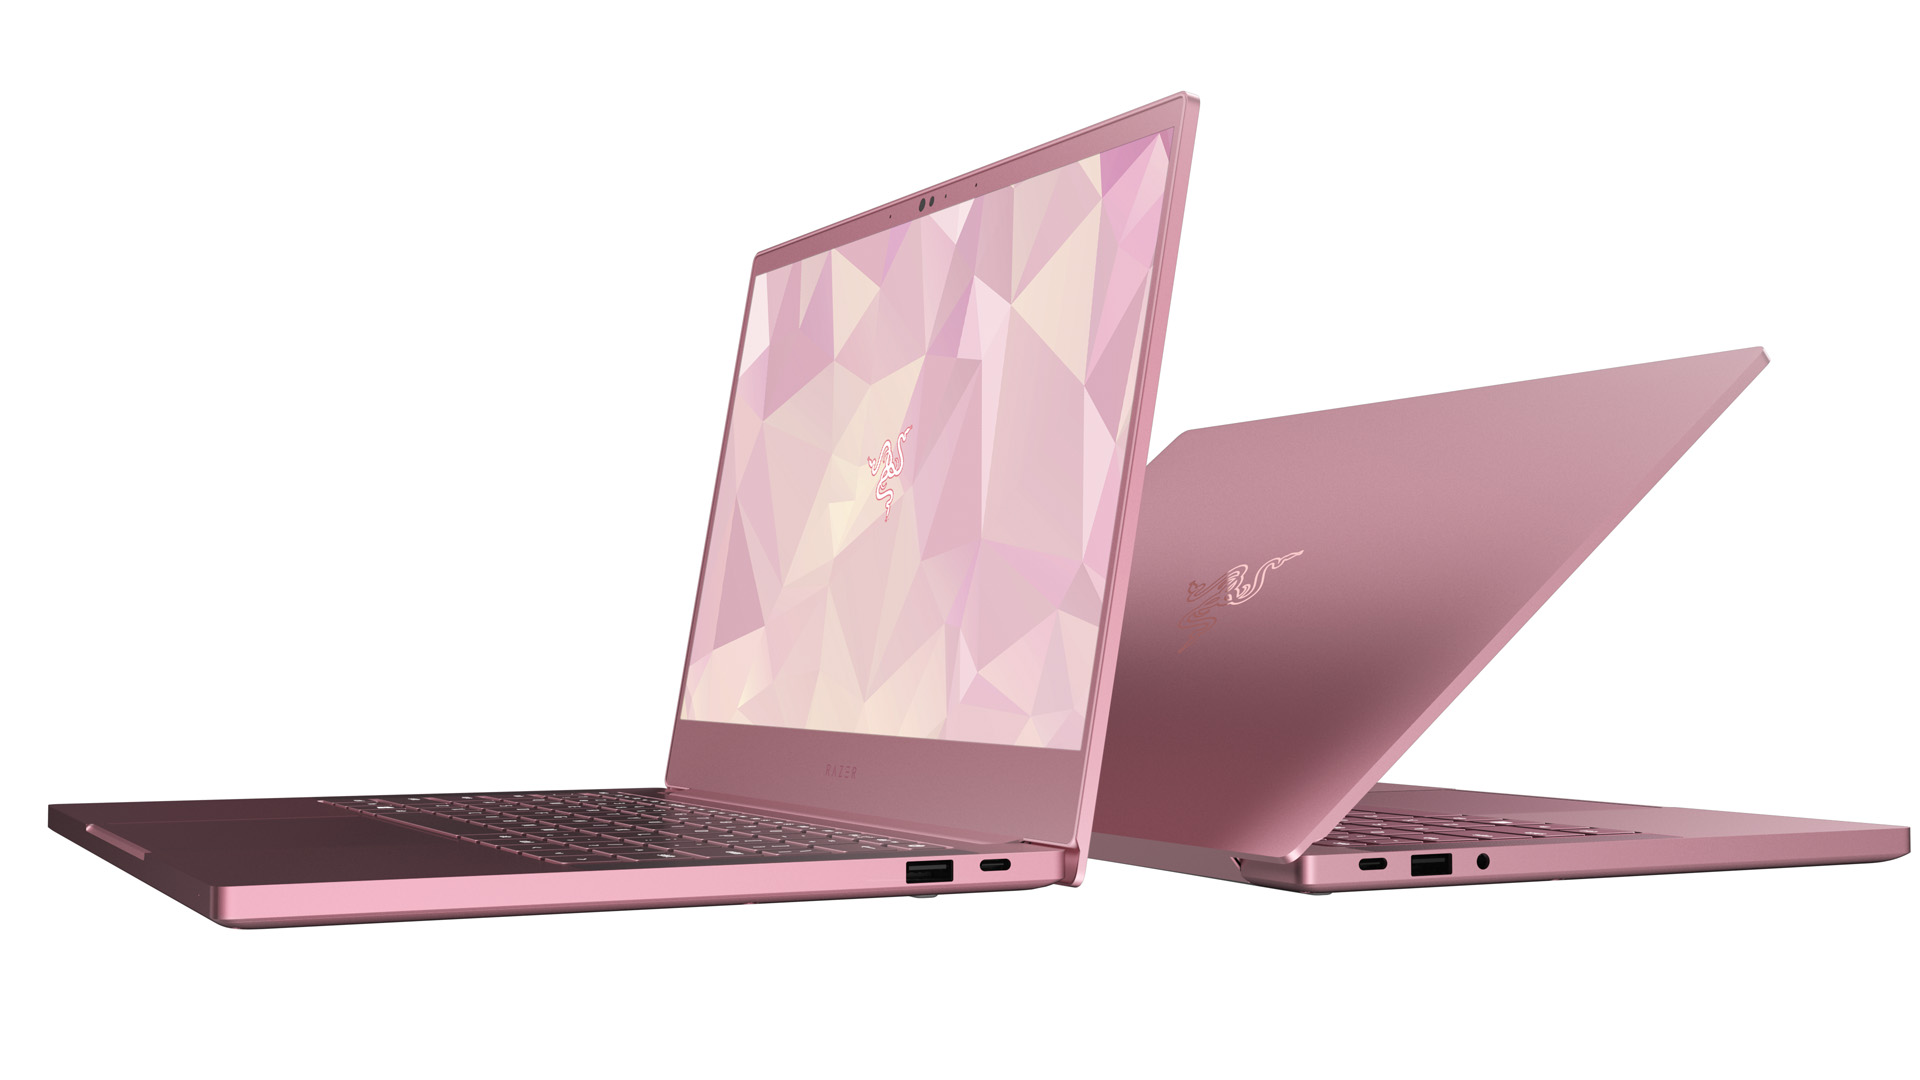 Sakura Pink Razer Laptops & Keyboards Are Out Now, And They're Badass